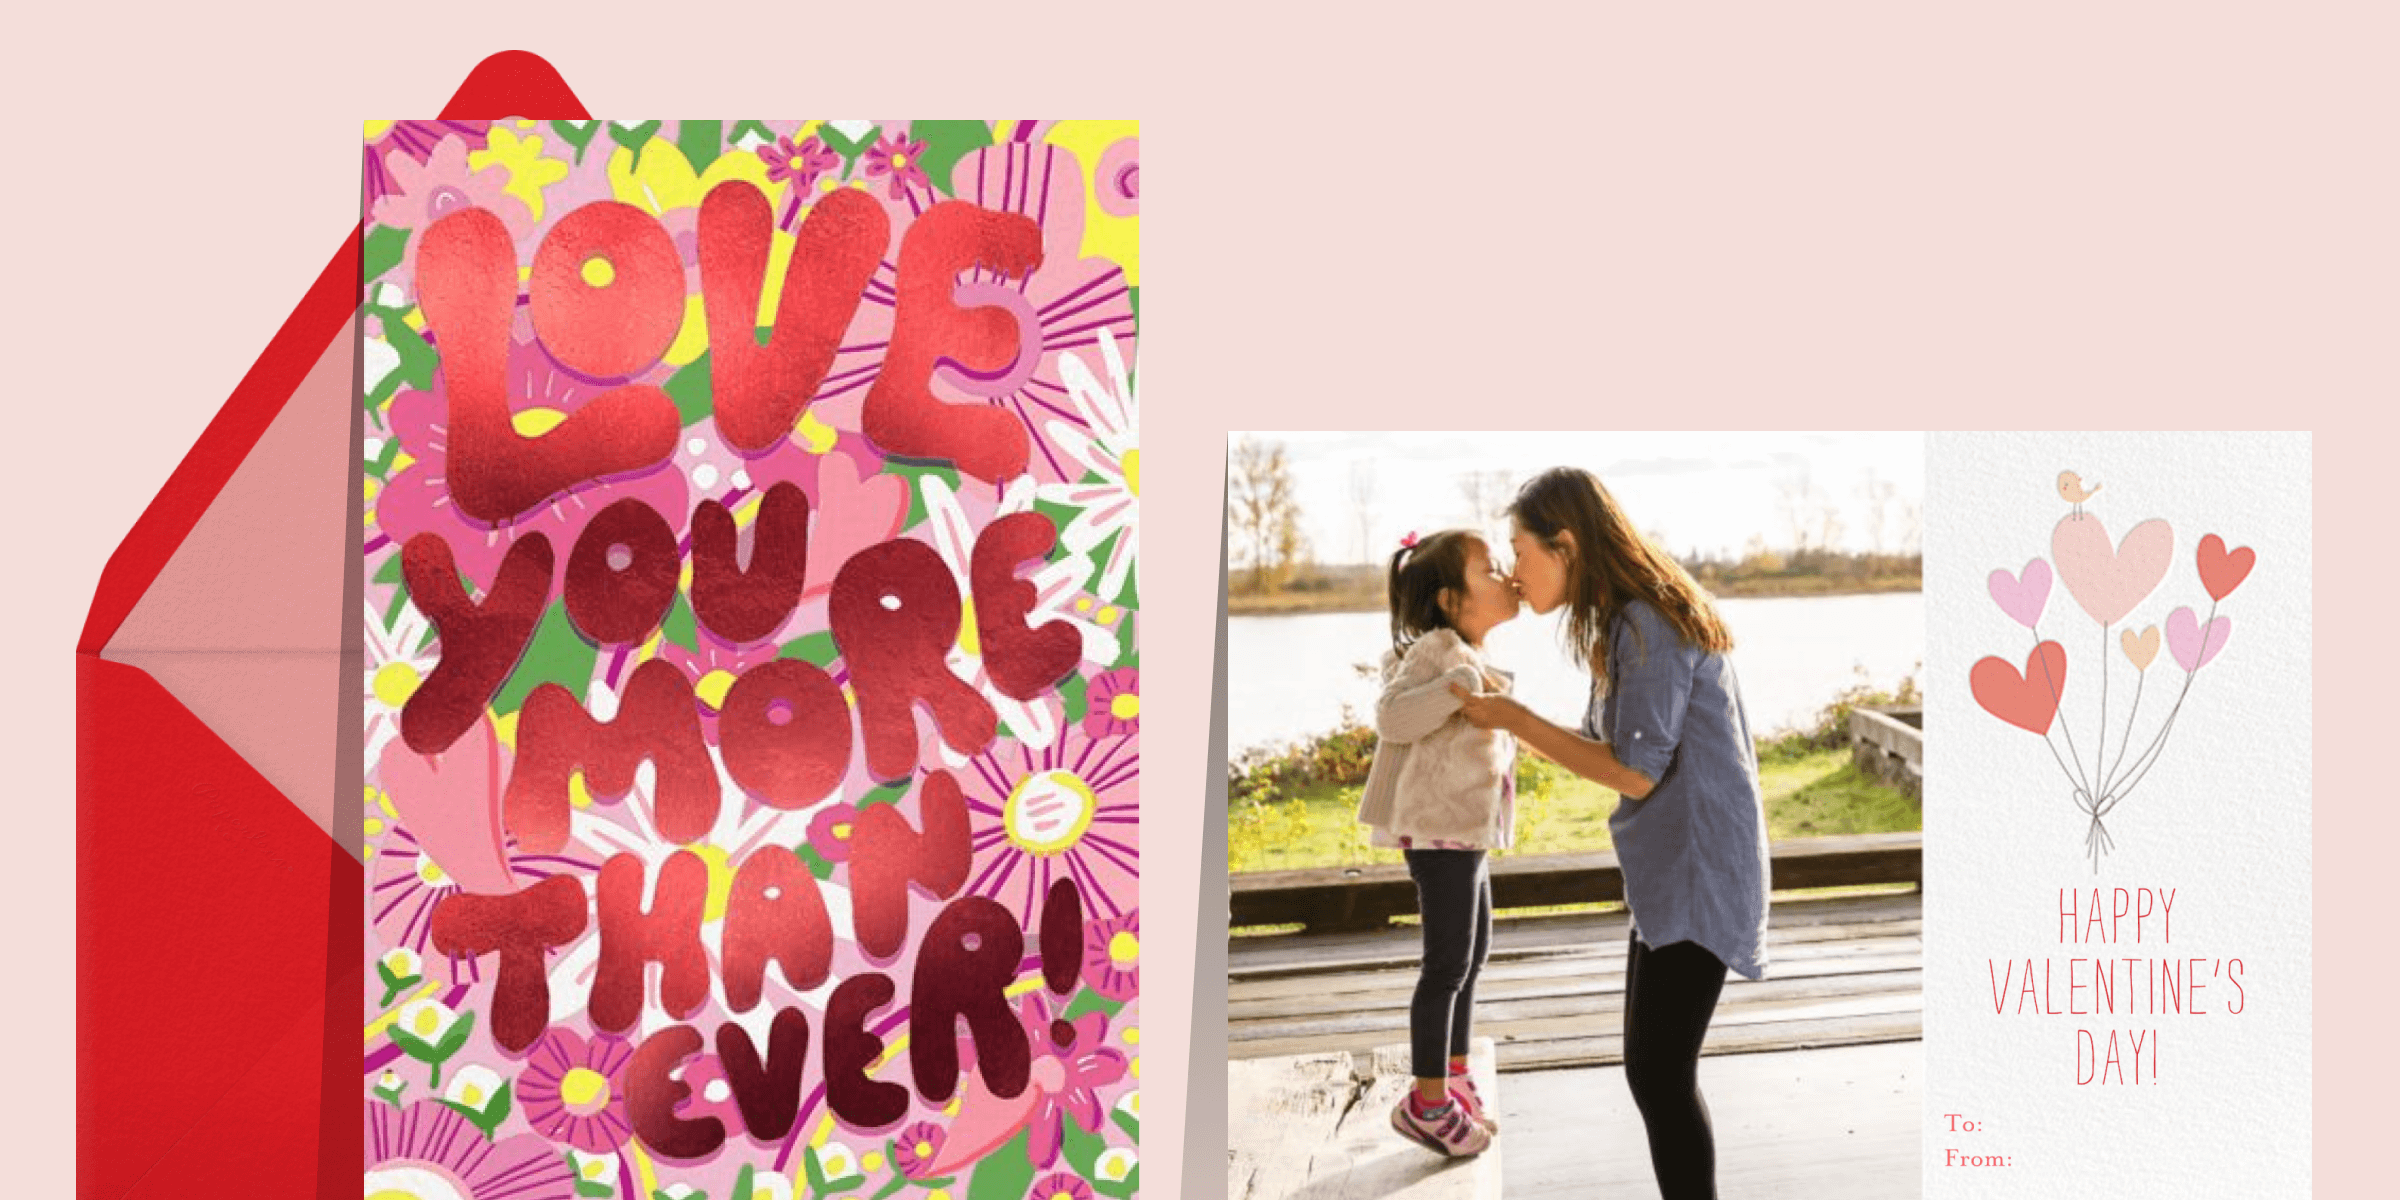 Side-by-side Valentine's Day cards. Left - A pink floral card that reads in red metallic text "Love you more than ever!" Right - A horizontal card with space for a photo and an illustration of heart-shaped balloons. The card reads "Happy Valentine's Day."